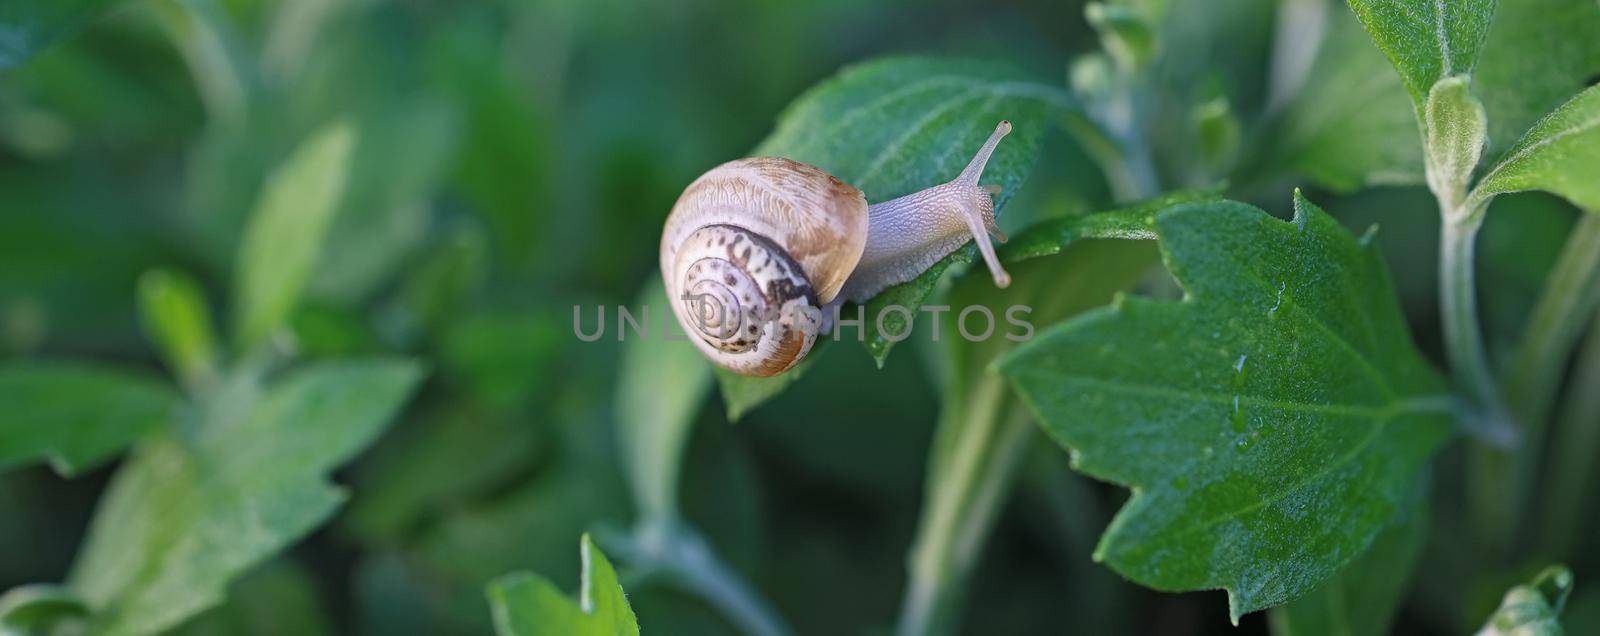 small snail in a shell crawls on the grass, a summer day in the garden. close up of small snail on plant leaf in garden outdoor, mollusk macro, nature, insect, animal